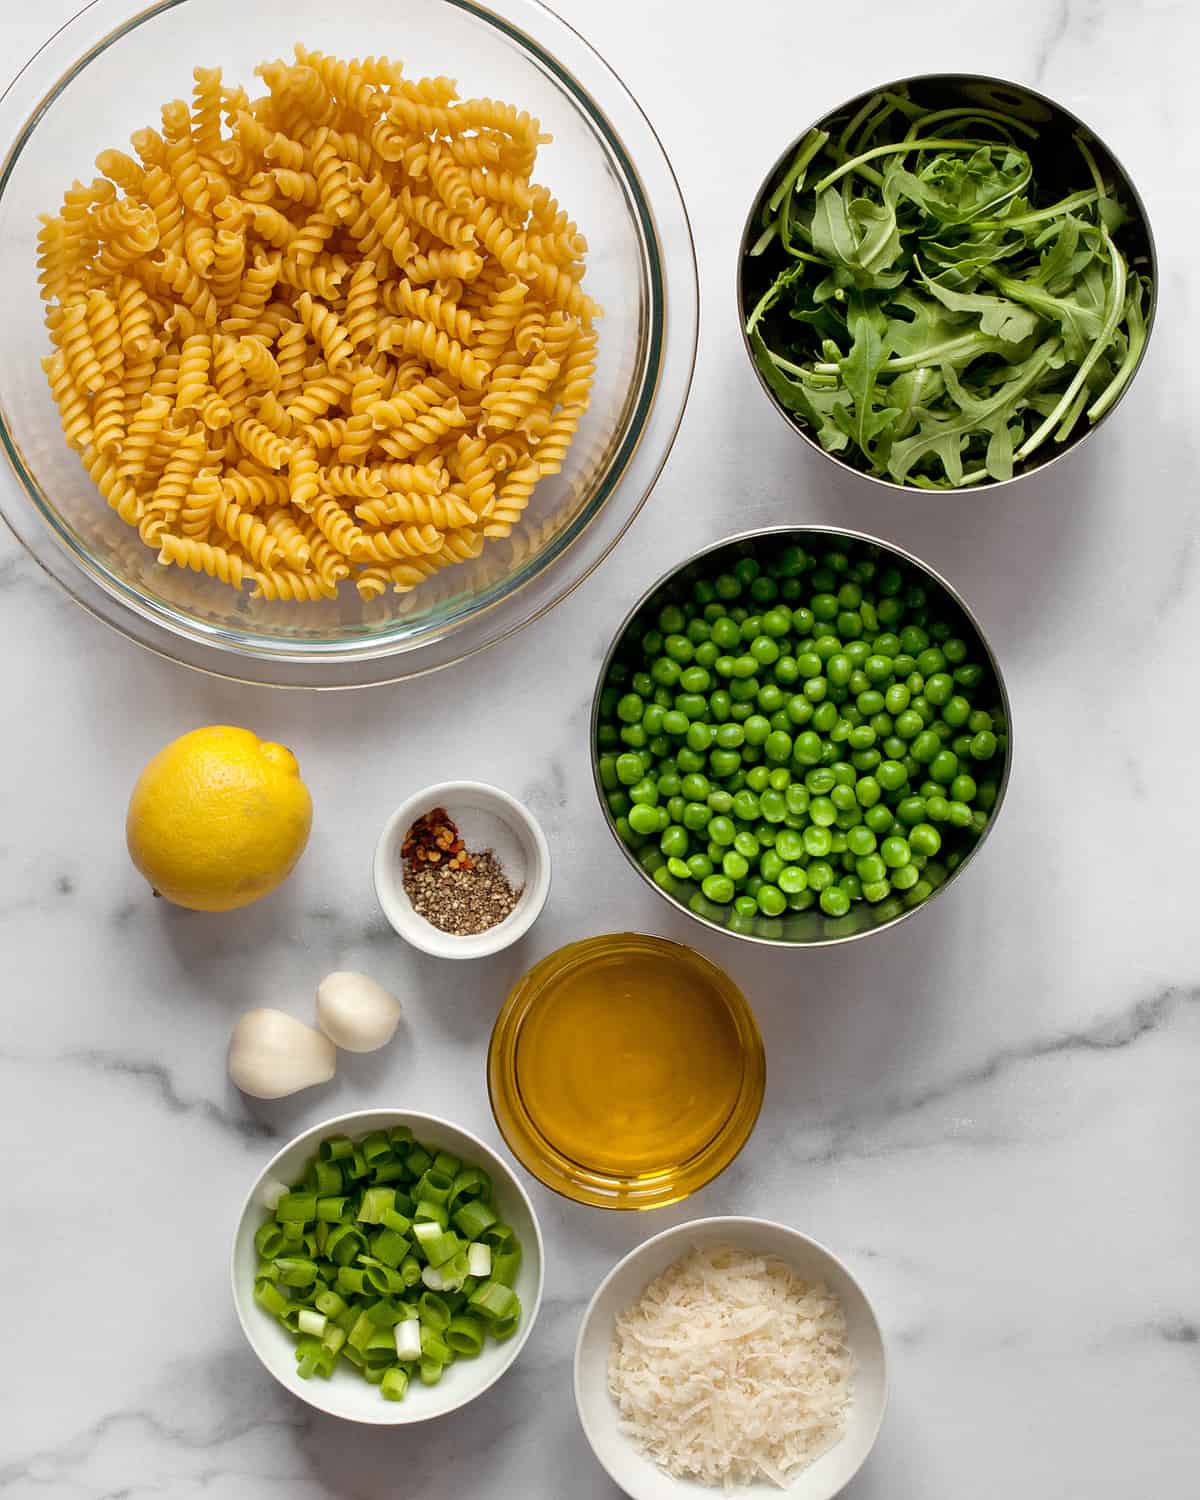 Ingredients including pasta, peas, lemon, arugula, garlic, olive oil and spices